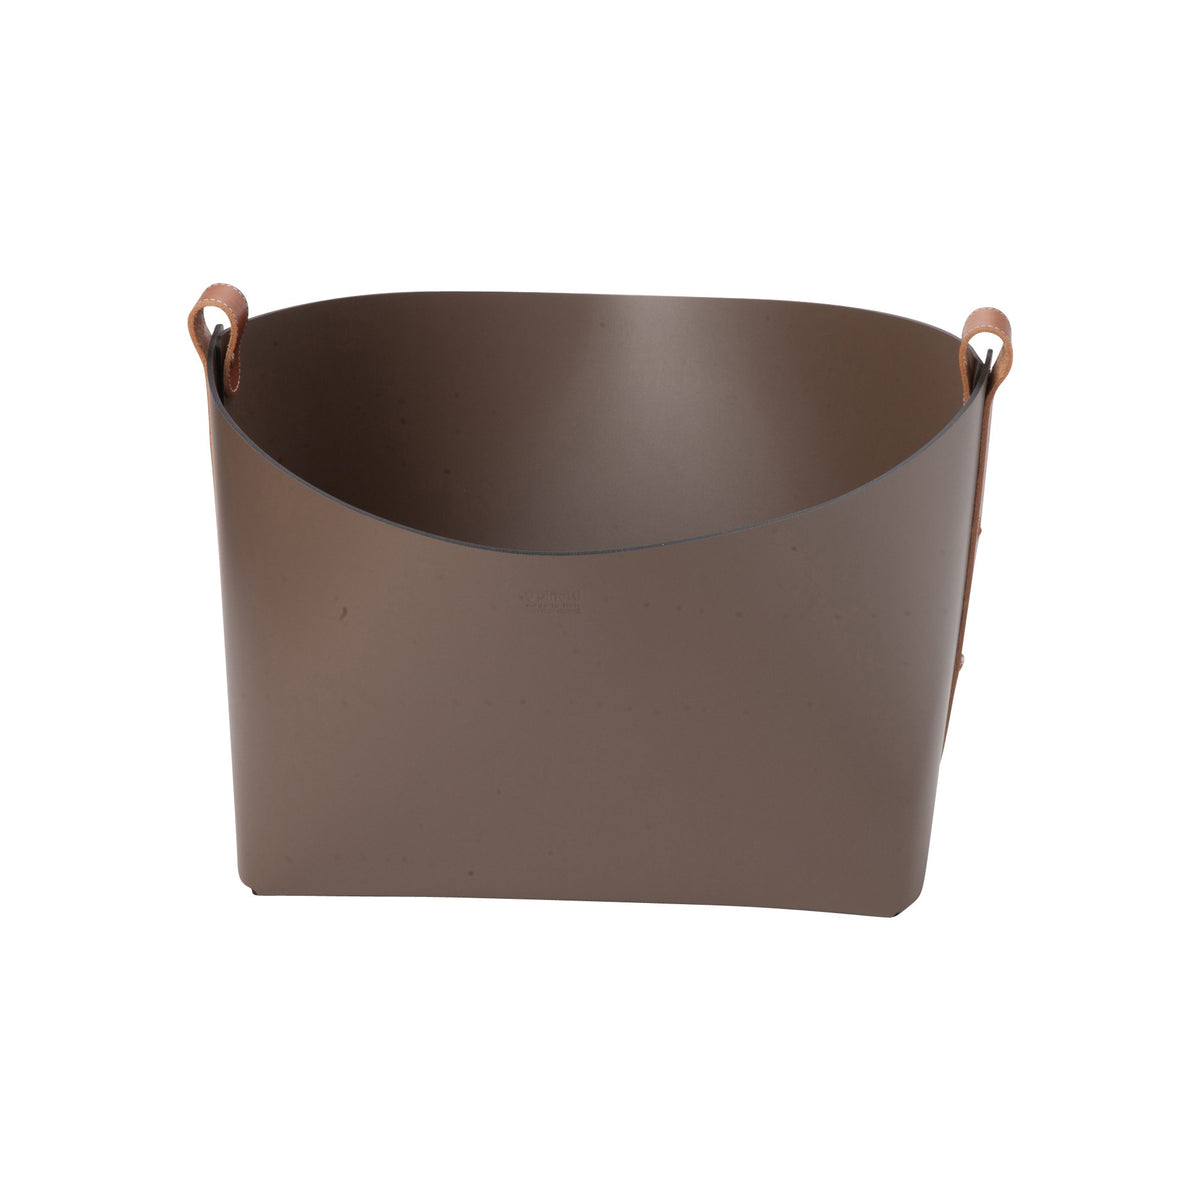 Leather Magazine Basket, Small - Taupe with Brown Strap